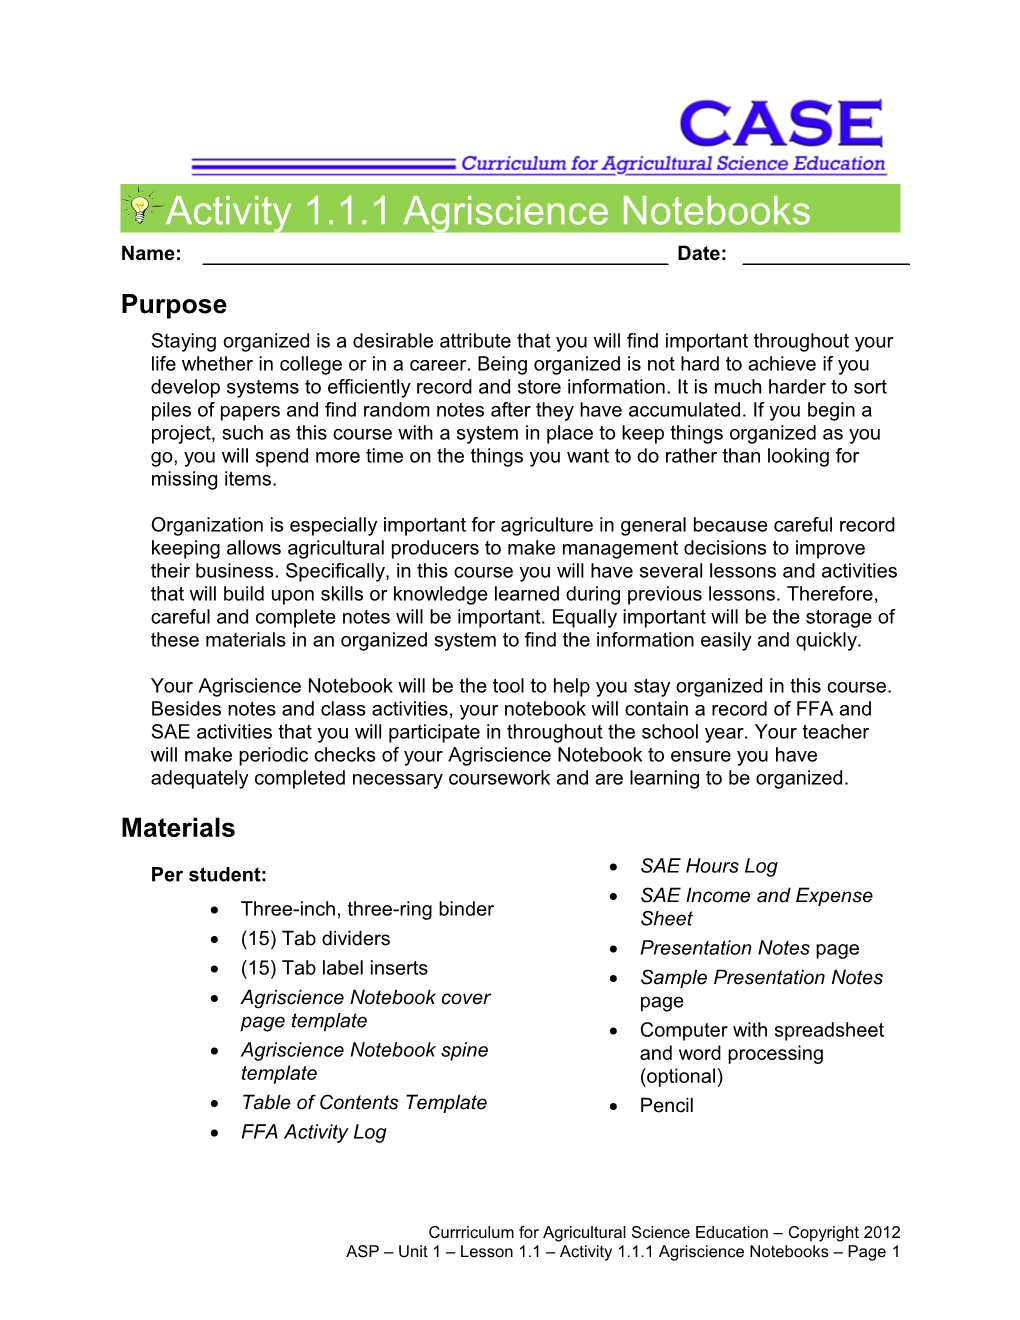 Activity 1.1.1 Agriscience Notebooks